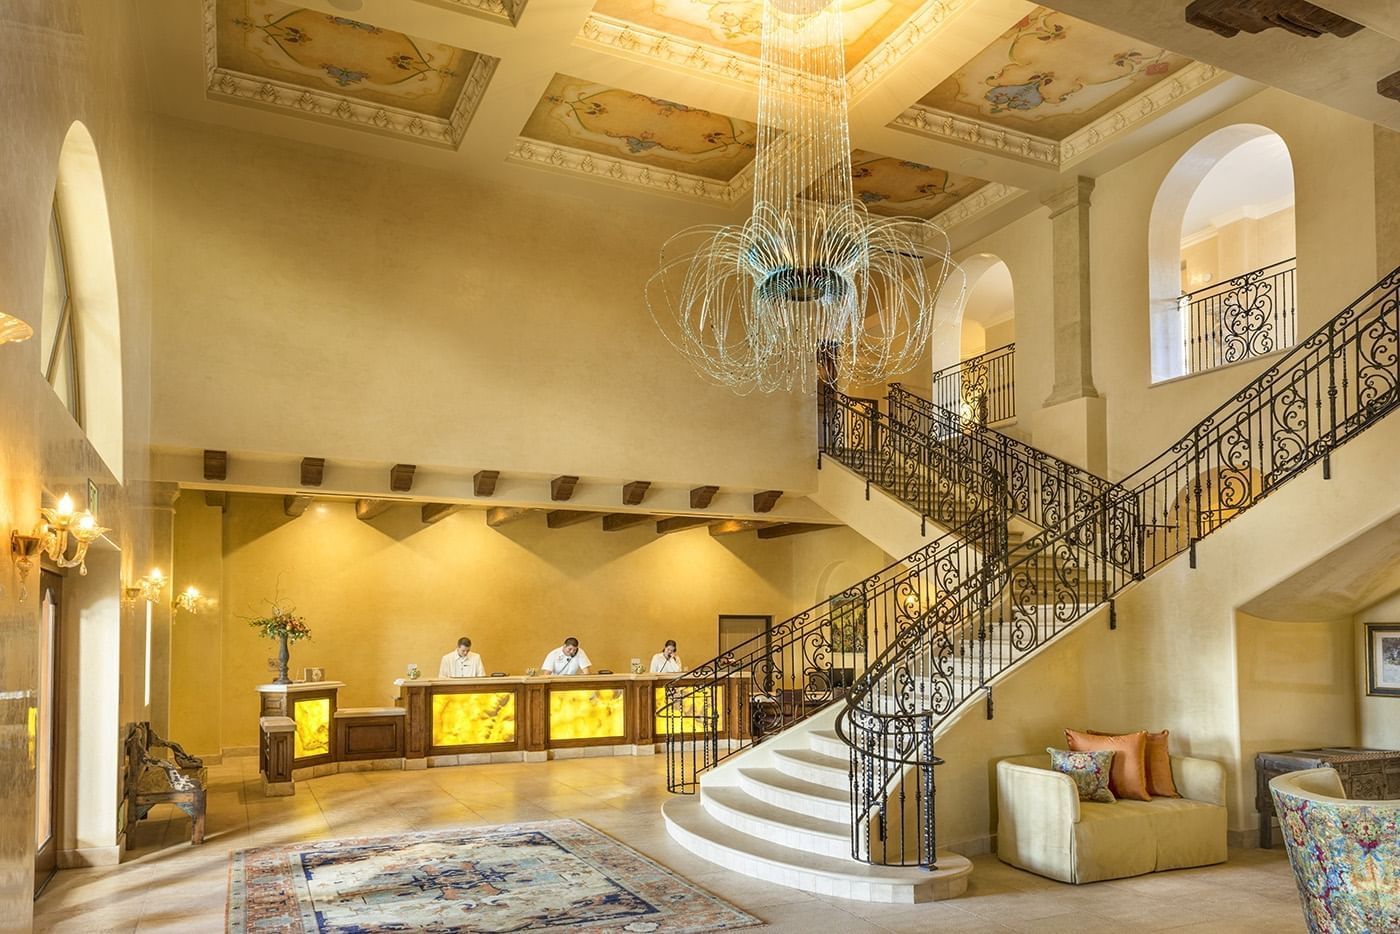 The resorts two story lobby with a center staircase and large ch